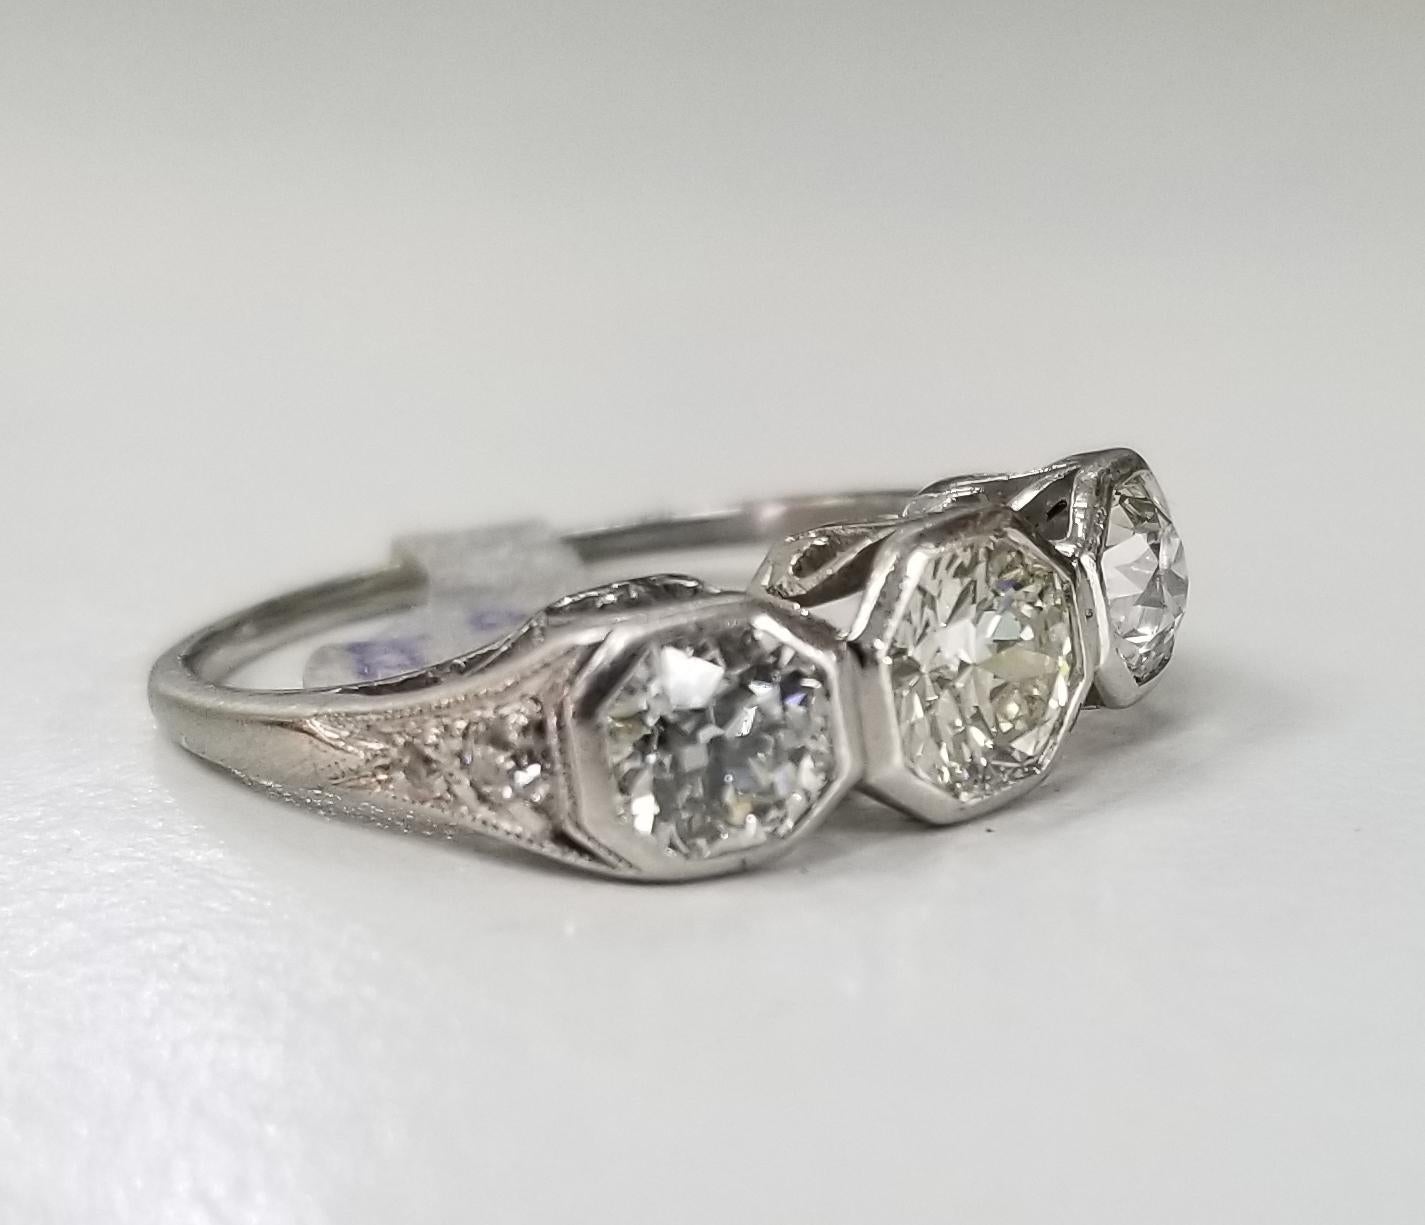 Platinum 3 diamond vintage ring, containing 3 round Euro cut diamonds of very fine quality weighing 1.75cts.  The center diamond; color 